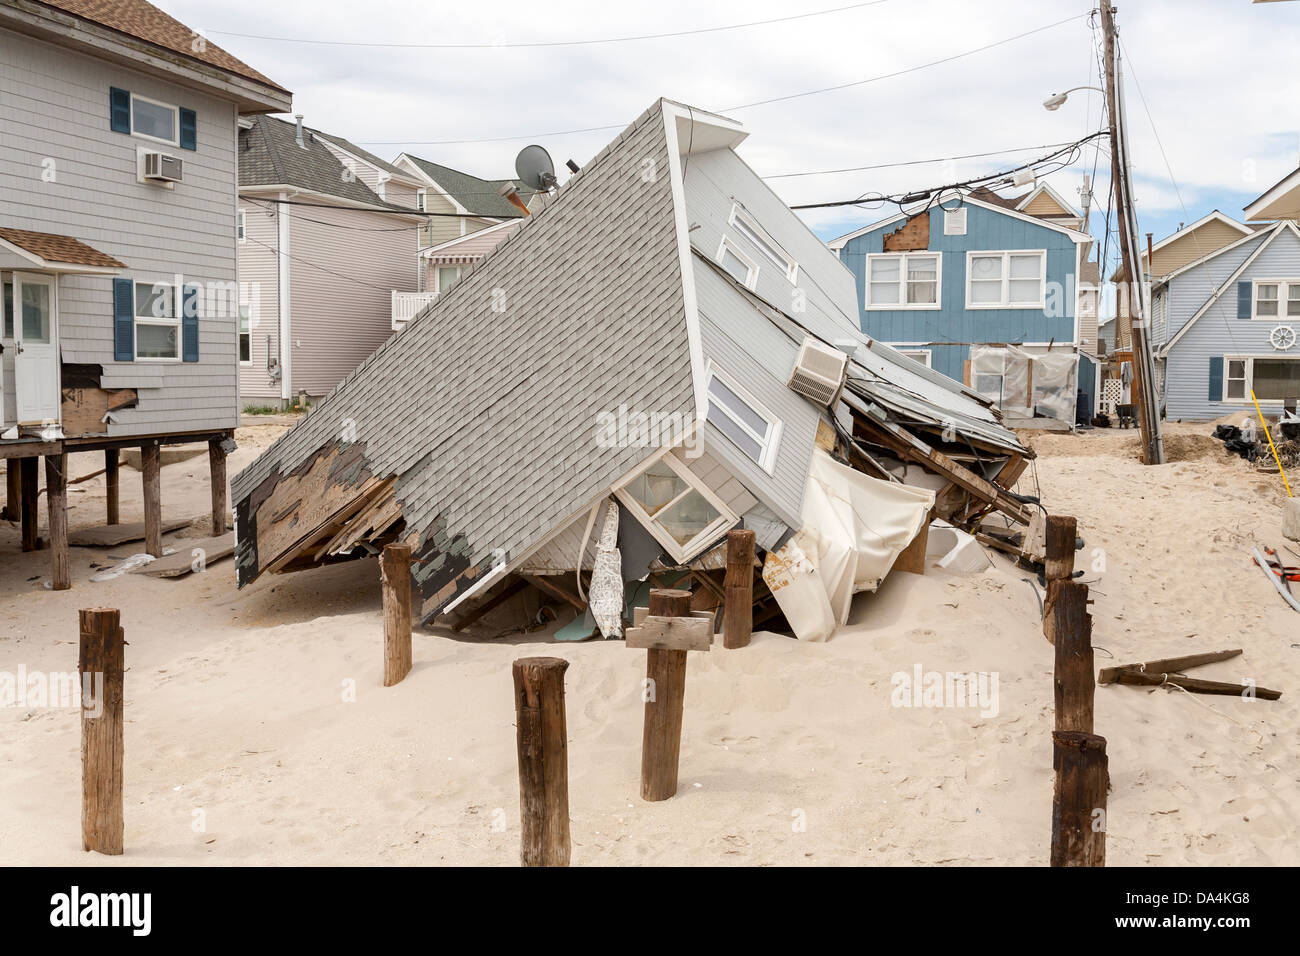 A hurricane leaves a path of destruction destroying homes and houses. Stock Photo